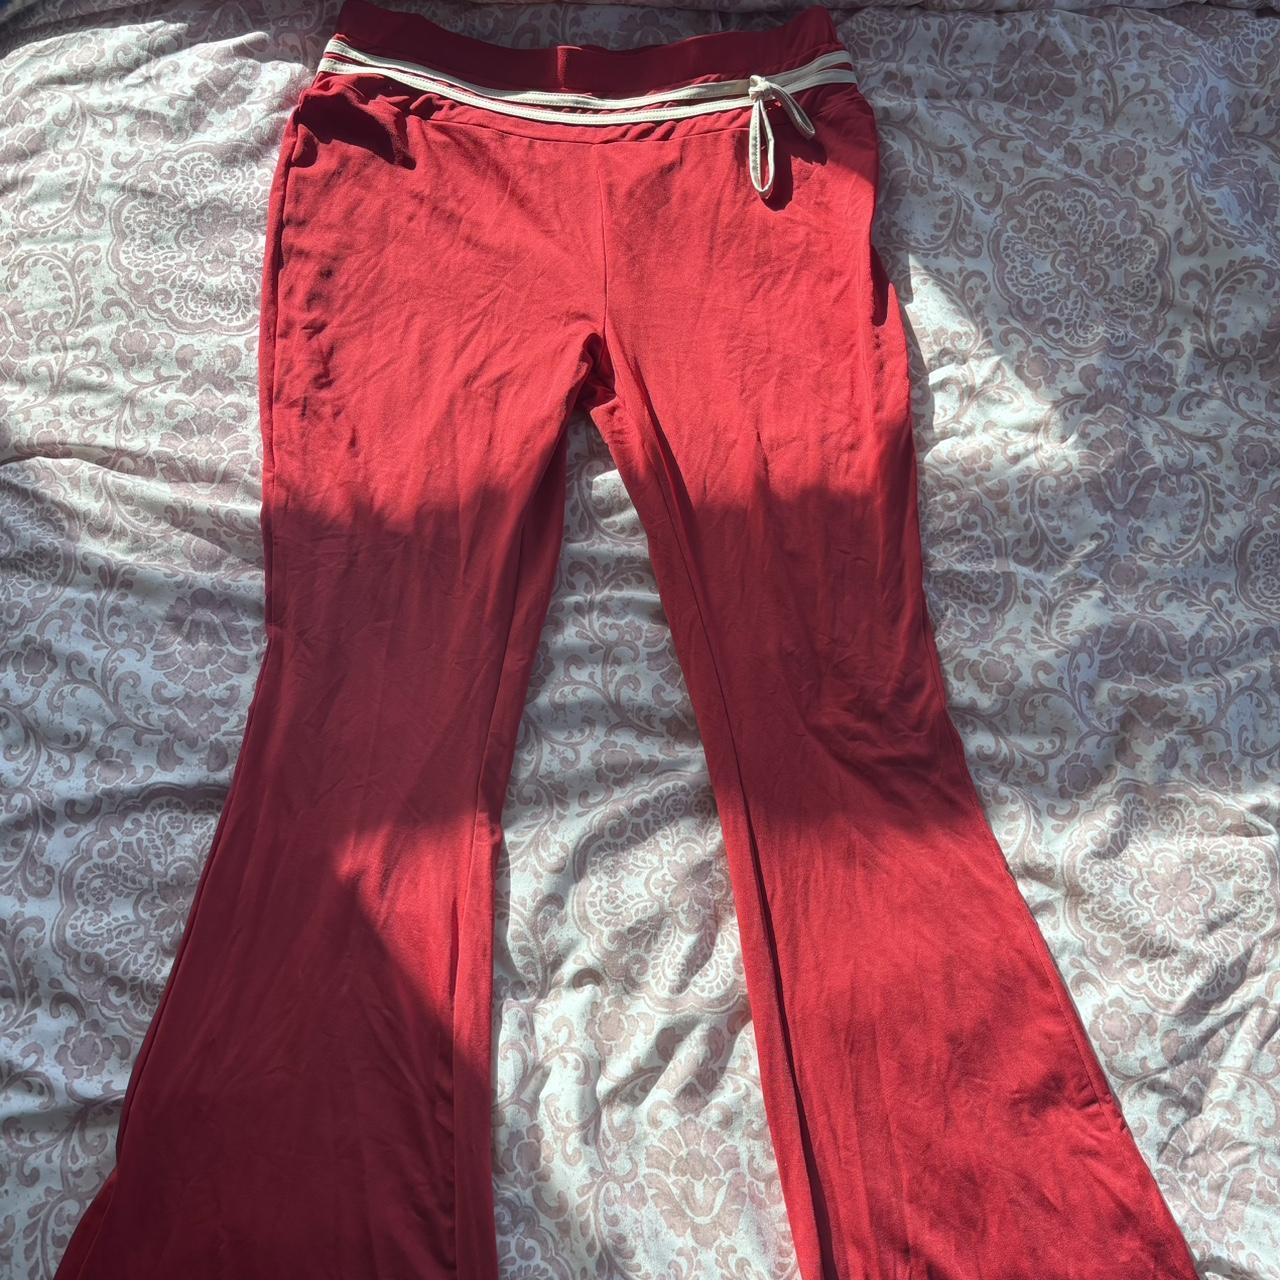 Red flare leggings with bow detail - Depop